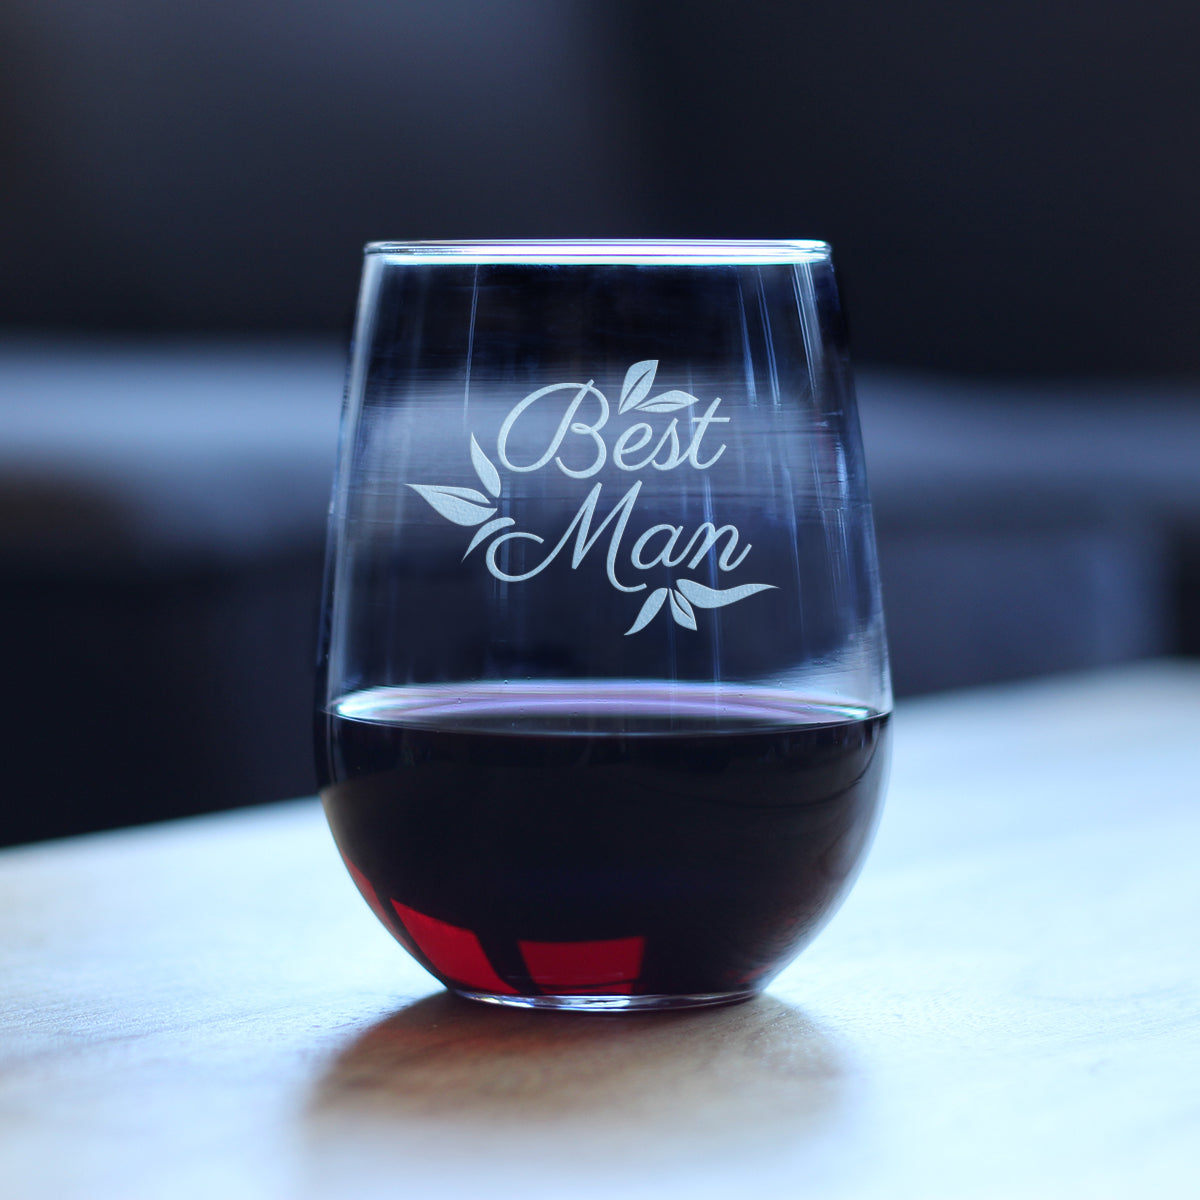 Best Man Stemless Wine Glass - Groomsmen Proposal Gifts - Unique Engraved Wedding Cup Gift